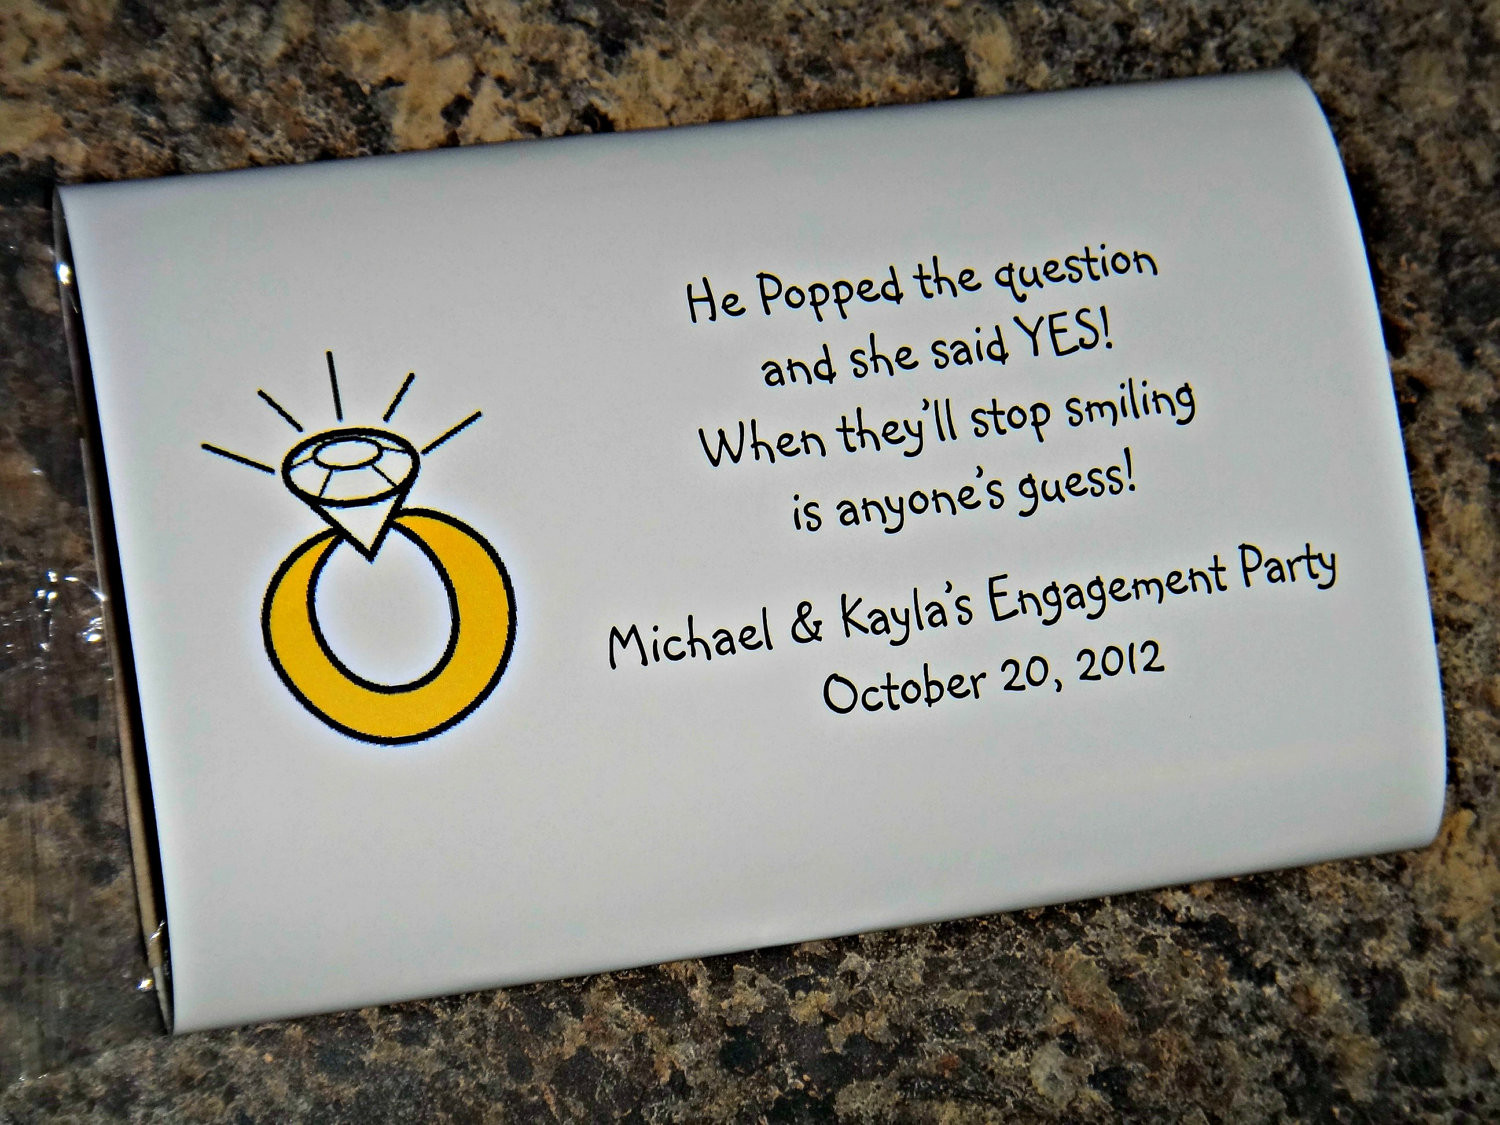 Cute Engagement Party Ideas
 SALE Cute and Classy Engagement Party Popcorn Wrappers Favors